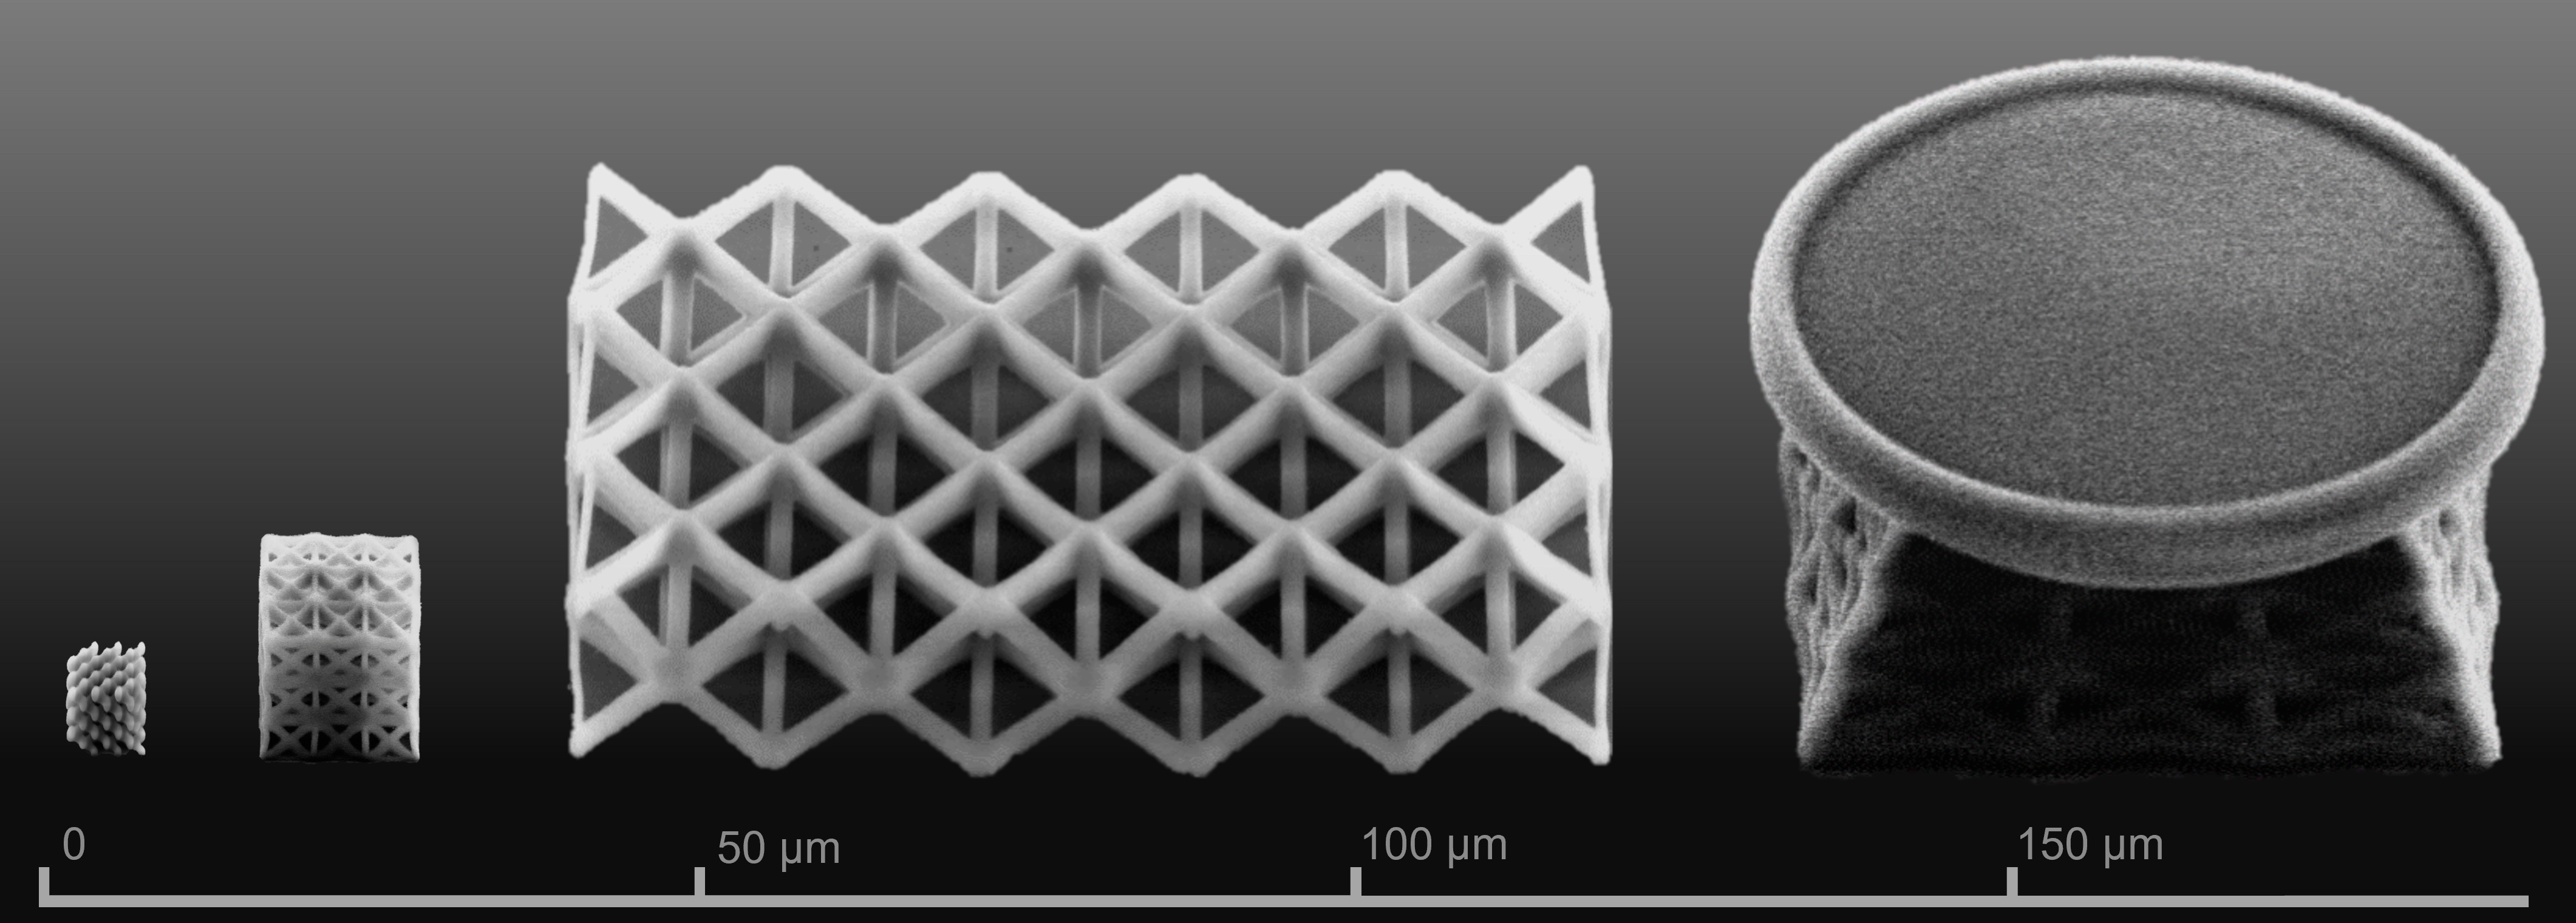 Microscopic images of the delicate structures printed by materials scientists at Rice University using their new technique. Sintering turns the structures into either glass or cristobalite. Image: The Nanomaterials, Nanomechanics and Nanodevices Lab/Rice University.